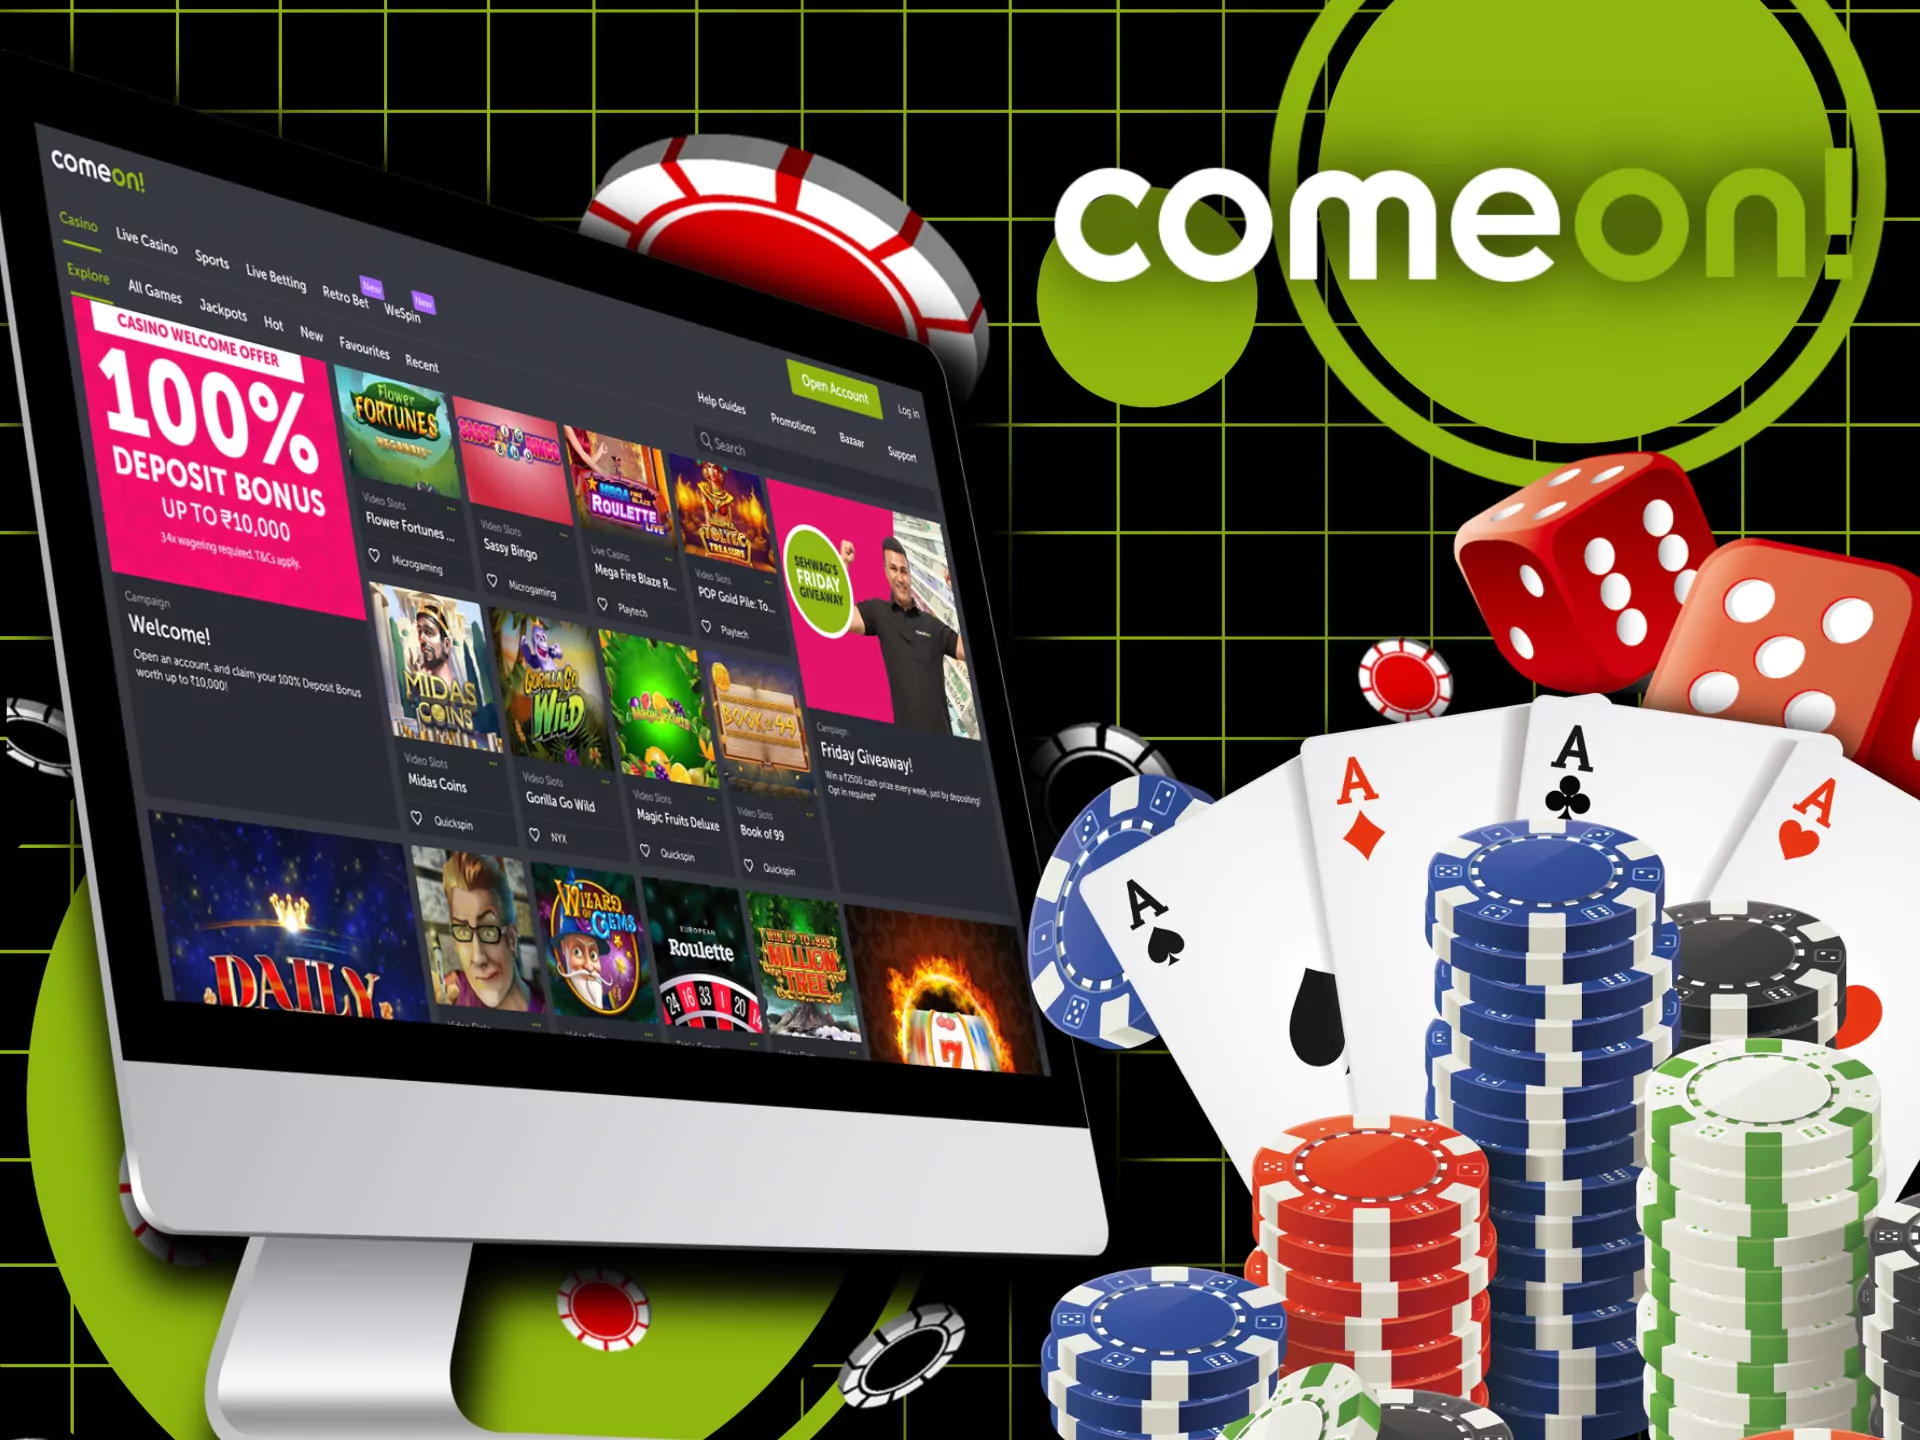 If you are also a casino fan, there is a special section with slots and games.